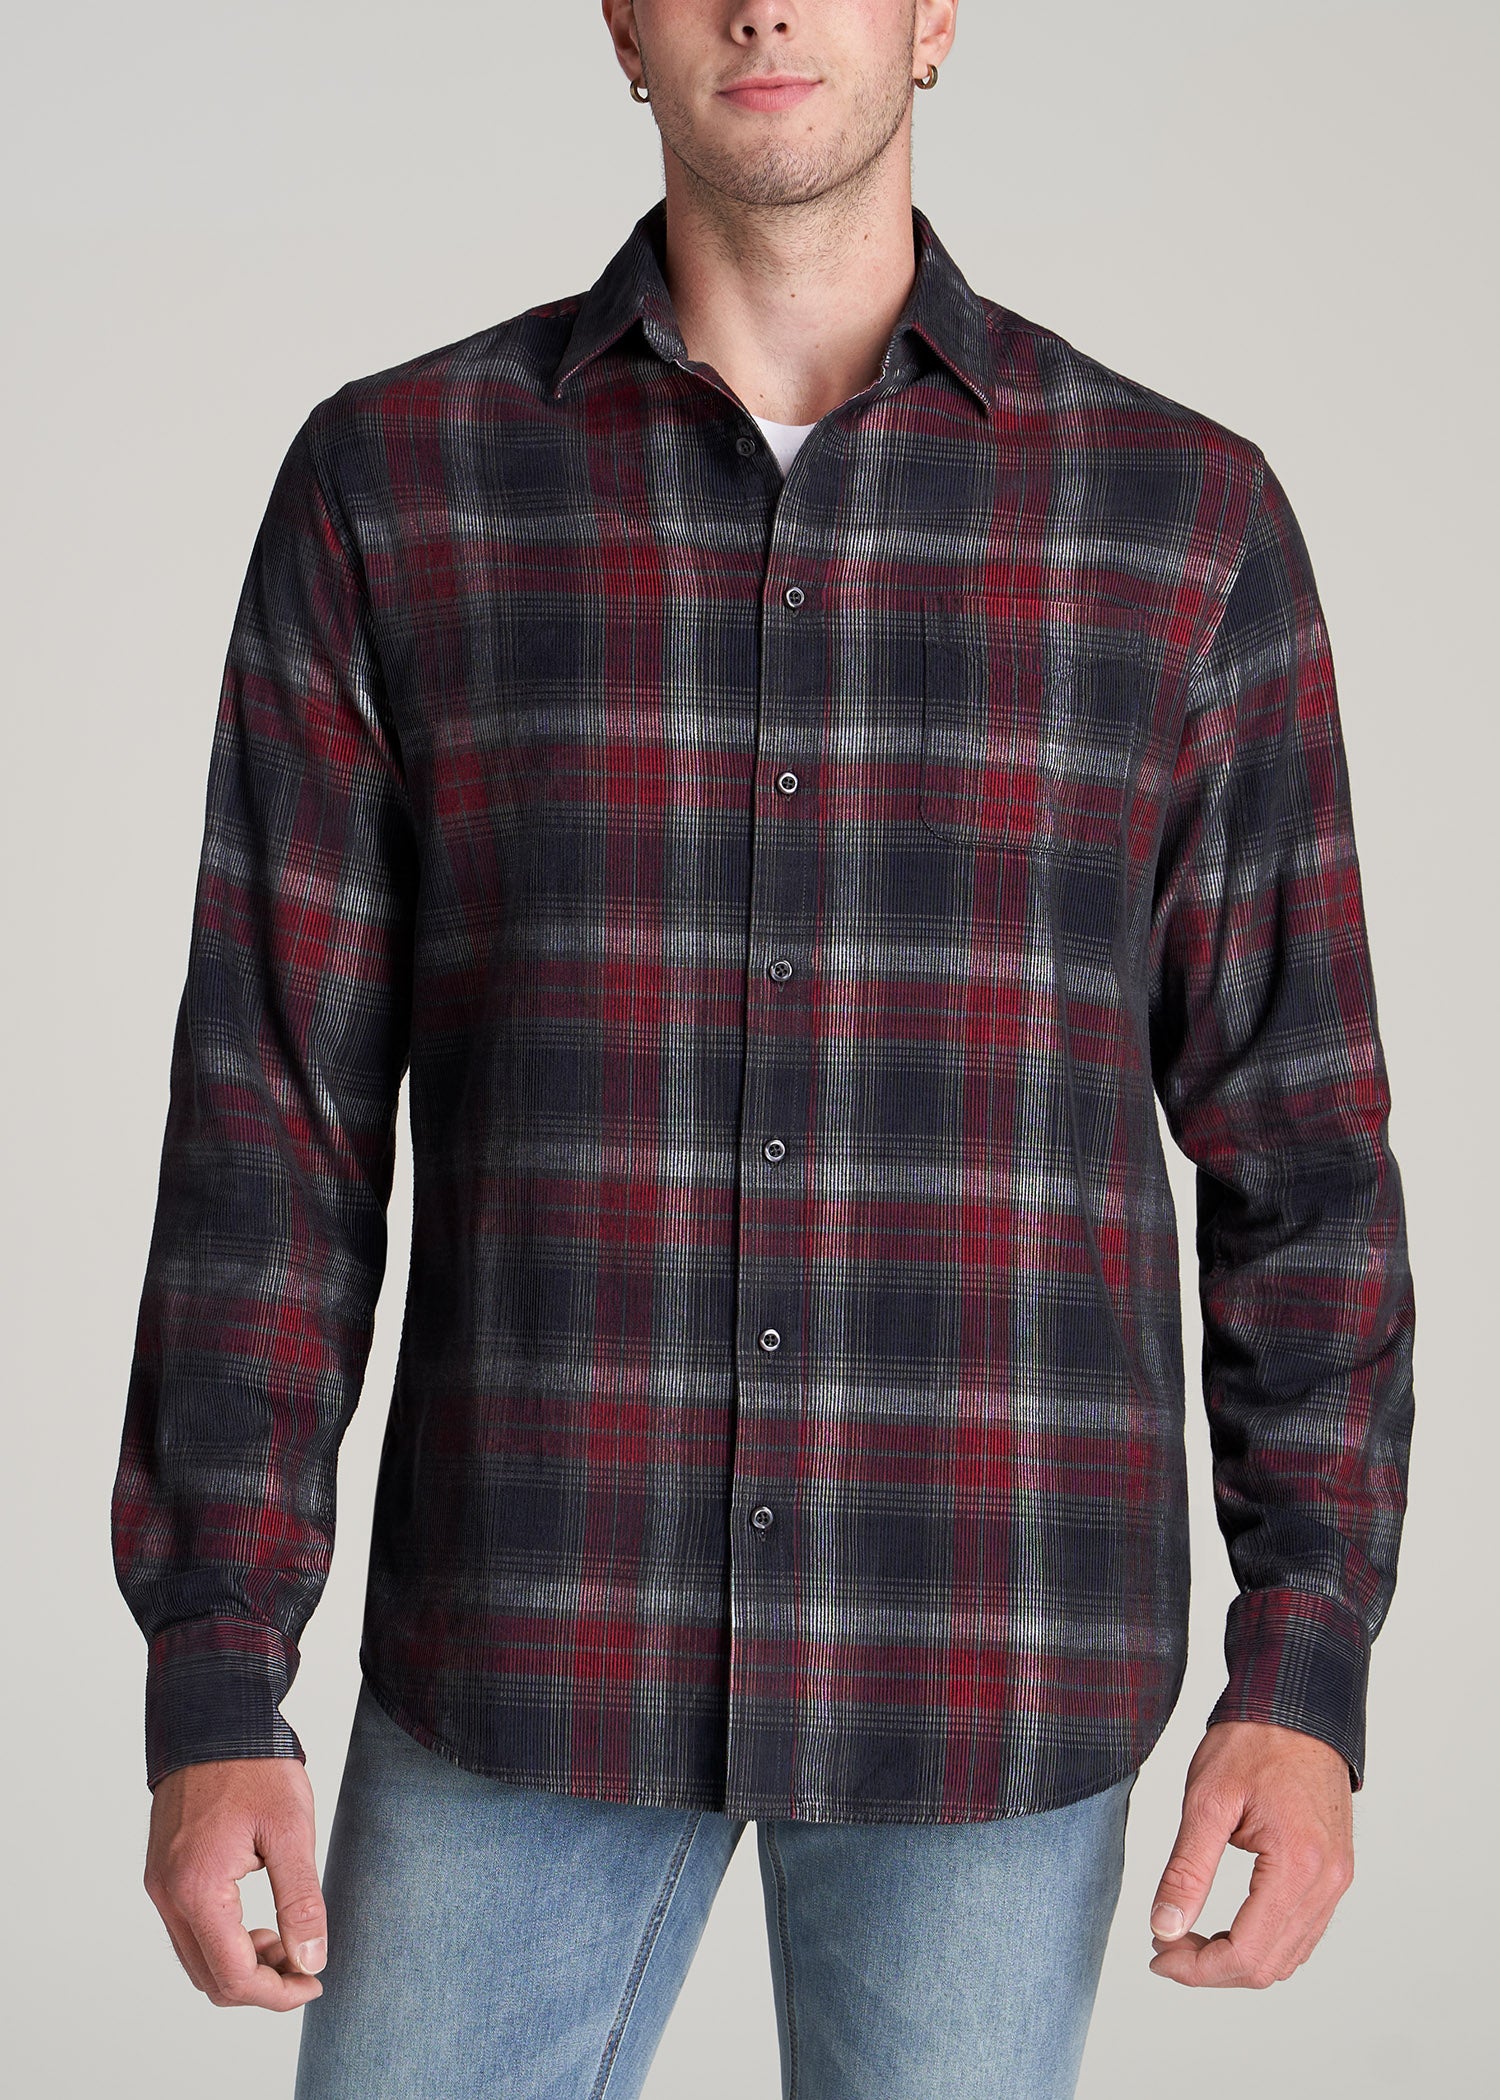       American-Tall-Men-Baby-Wale-Corduroy-Button-Shirt-Charcoal-Red-Plaid-front